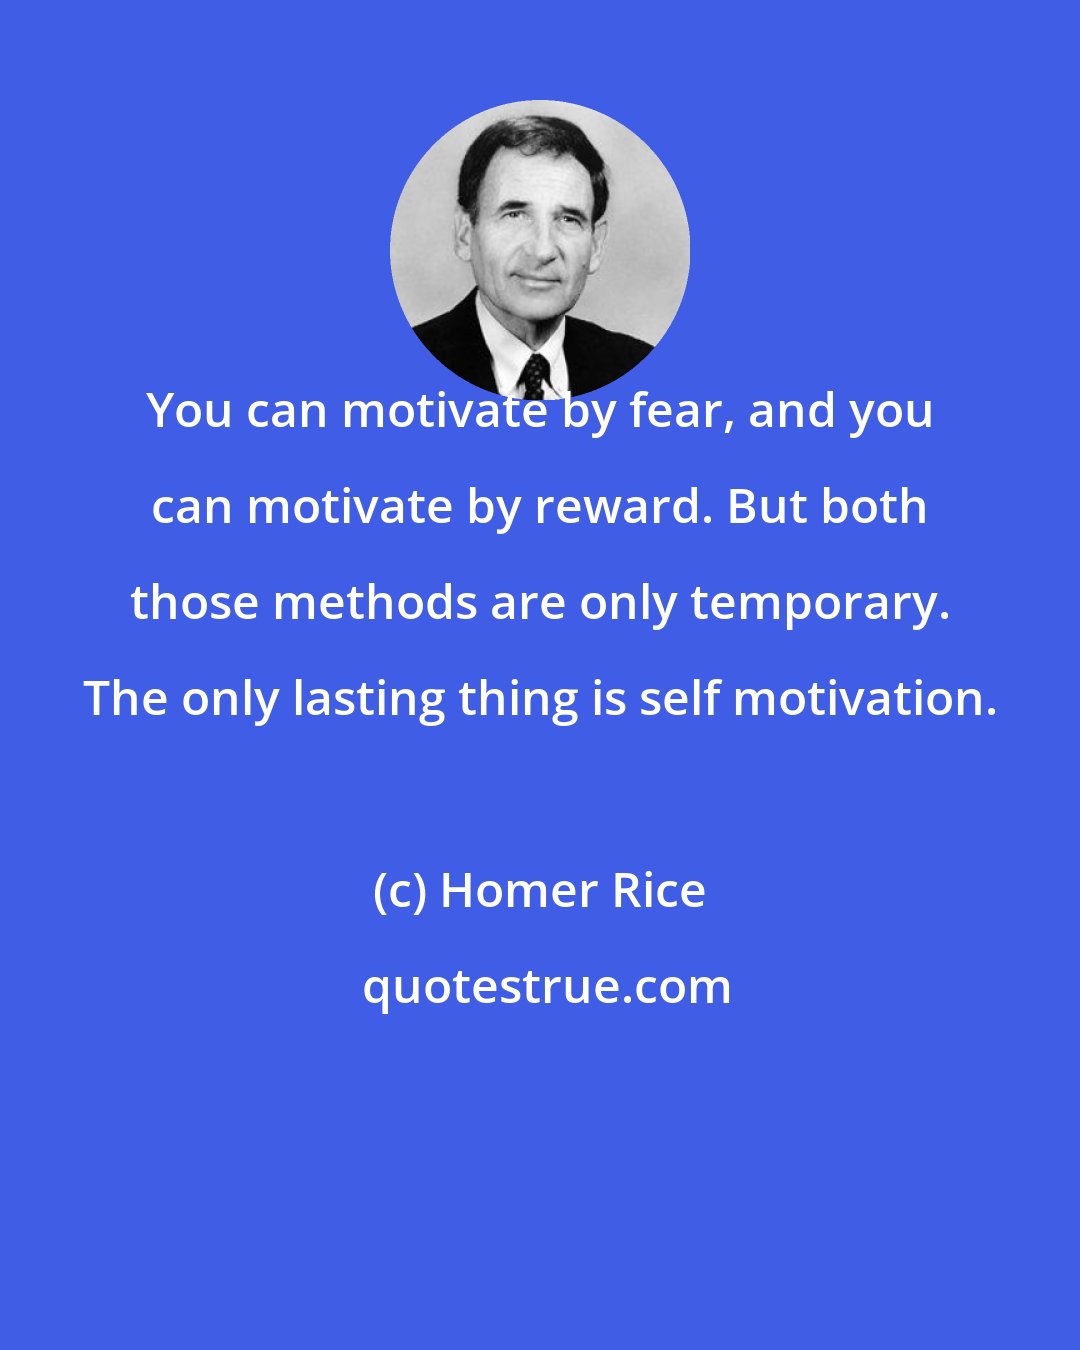 Homer Rice: You can motivate by fear, and you can motivate by reward. But both those methods are only temporary. The only lasting thing is self motivation.